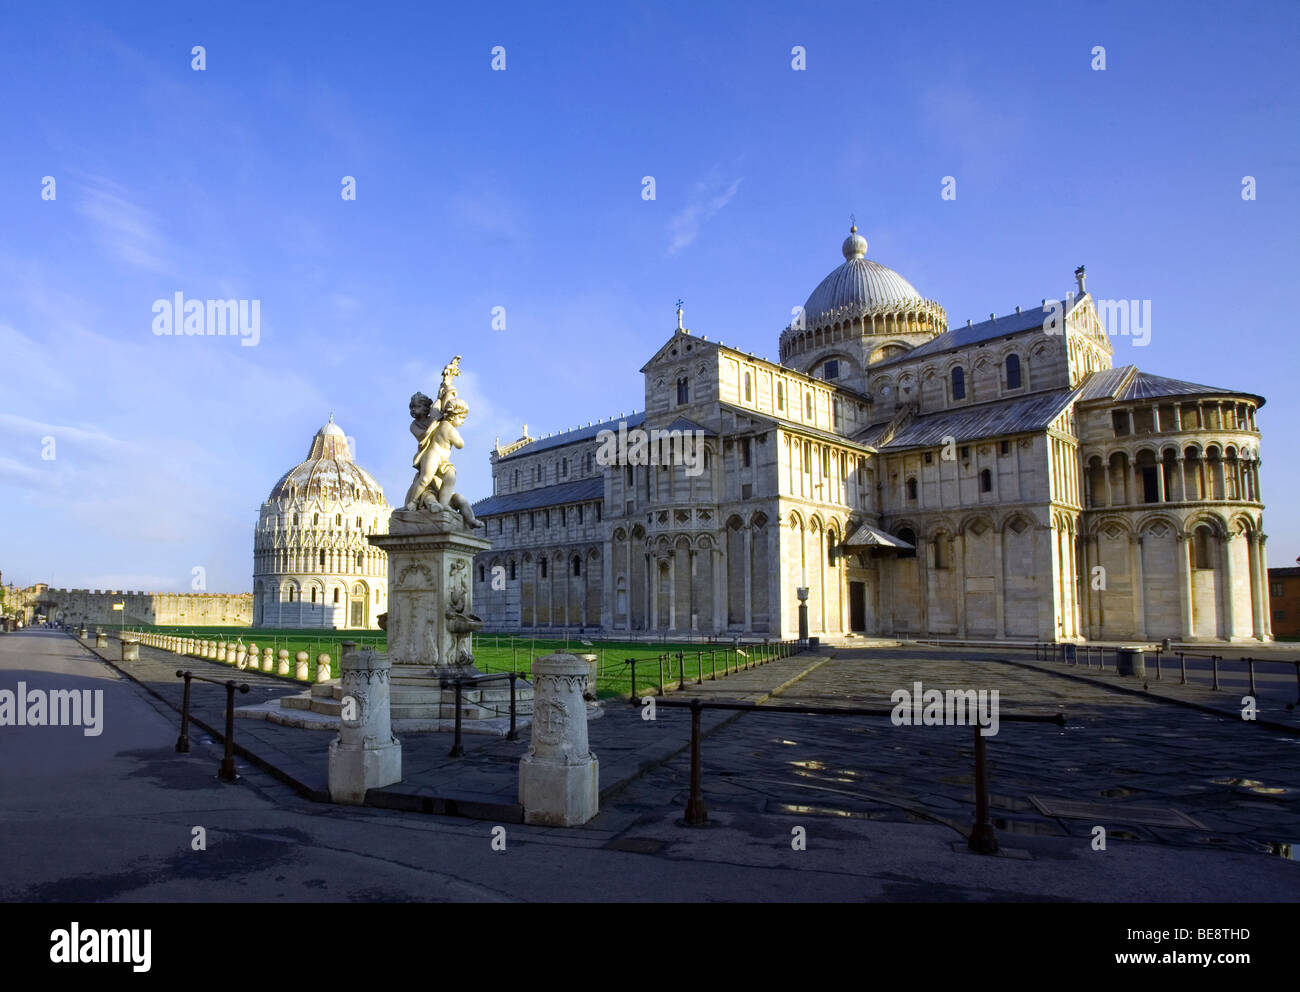 View of The Piazza dei Miracoli with the Duomo and Bapistry in Pisa,Tuscany, Italy Stock Photo